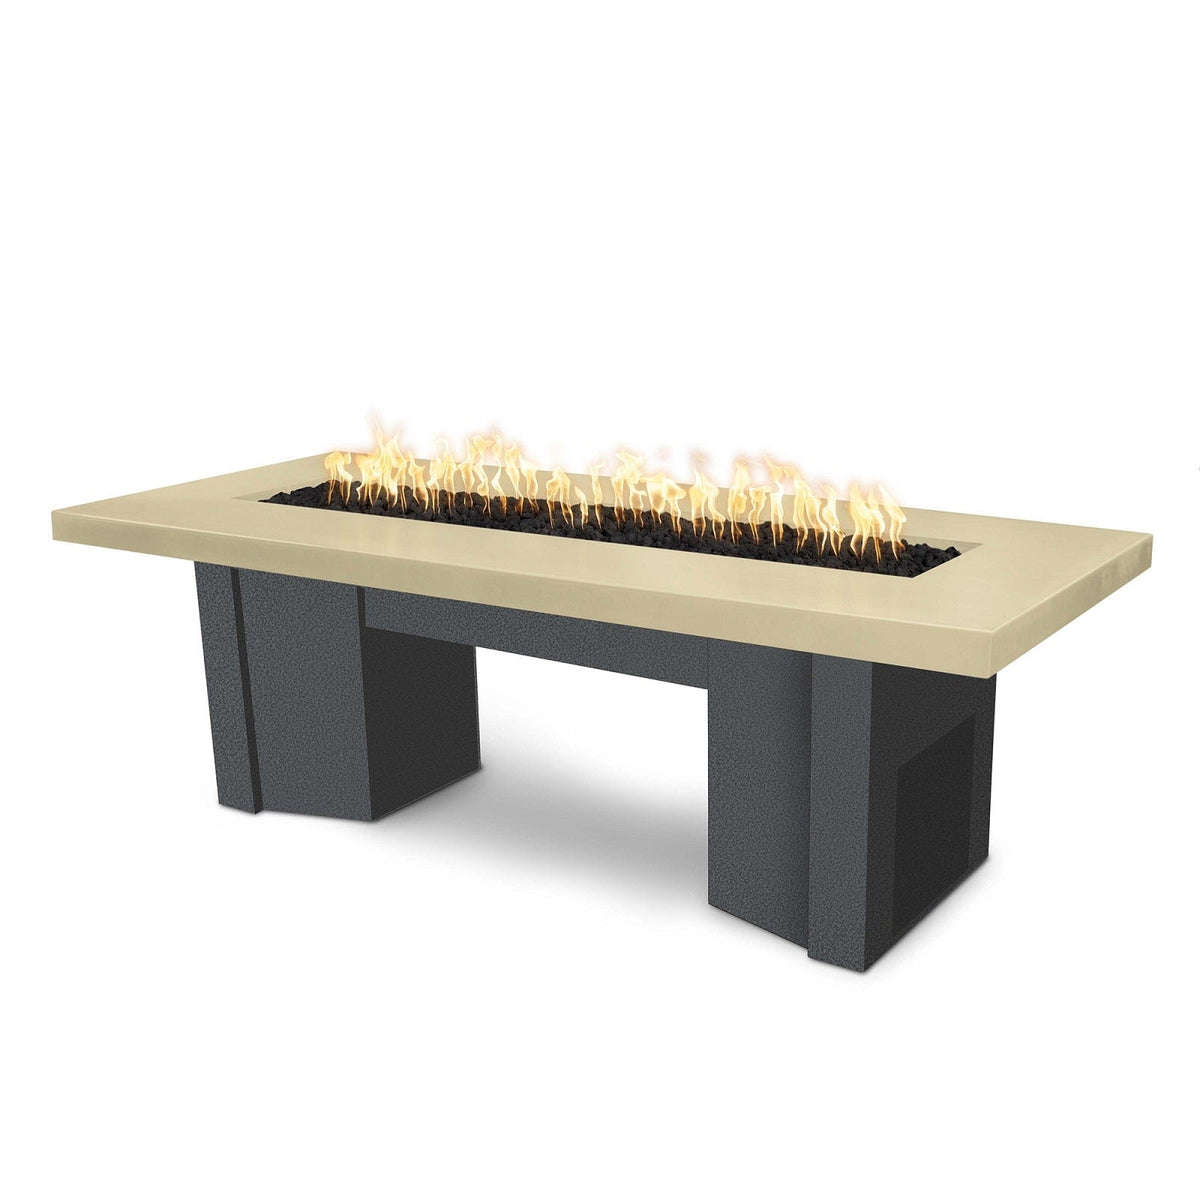 The Outdoor Plus Fire Features Vanilla (-VAN) / Silver Vein Powder Coated Steel (-SLV) The Outdoor Plus 78&quot; Alameda Fire Table Smooth Concrete in Liquid Propane - 110V Plug &amp; Play Electronic Ignition / OPT-ALMGFRC78EKIT-LP